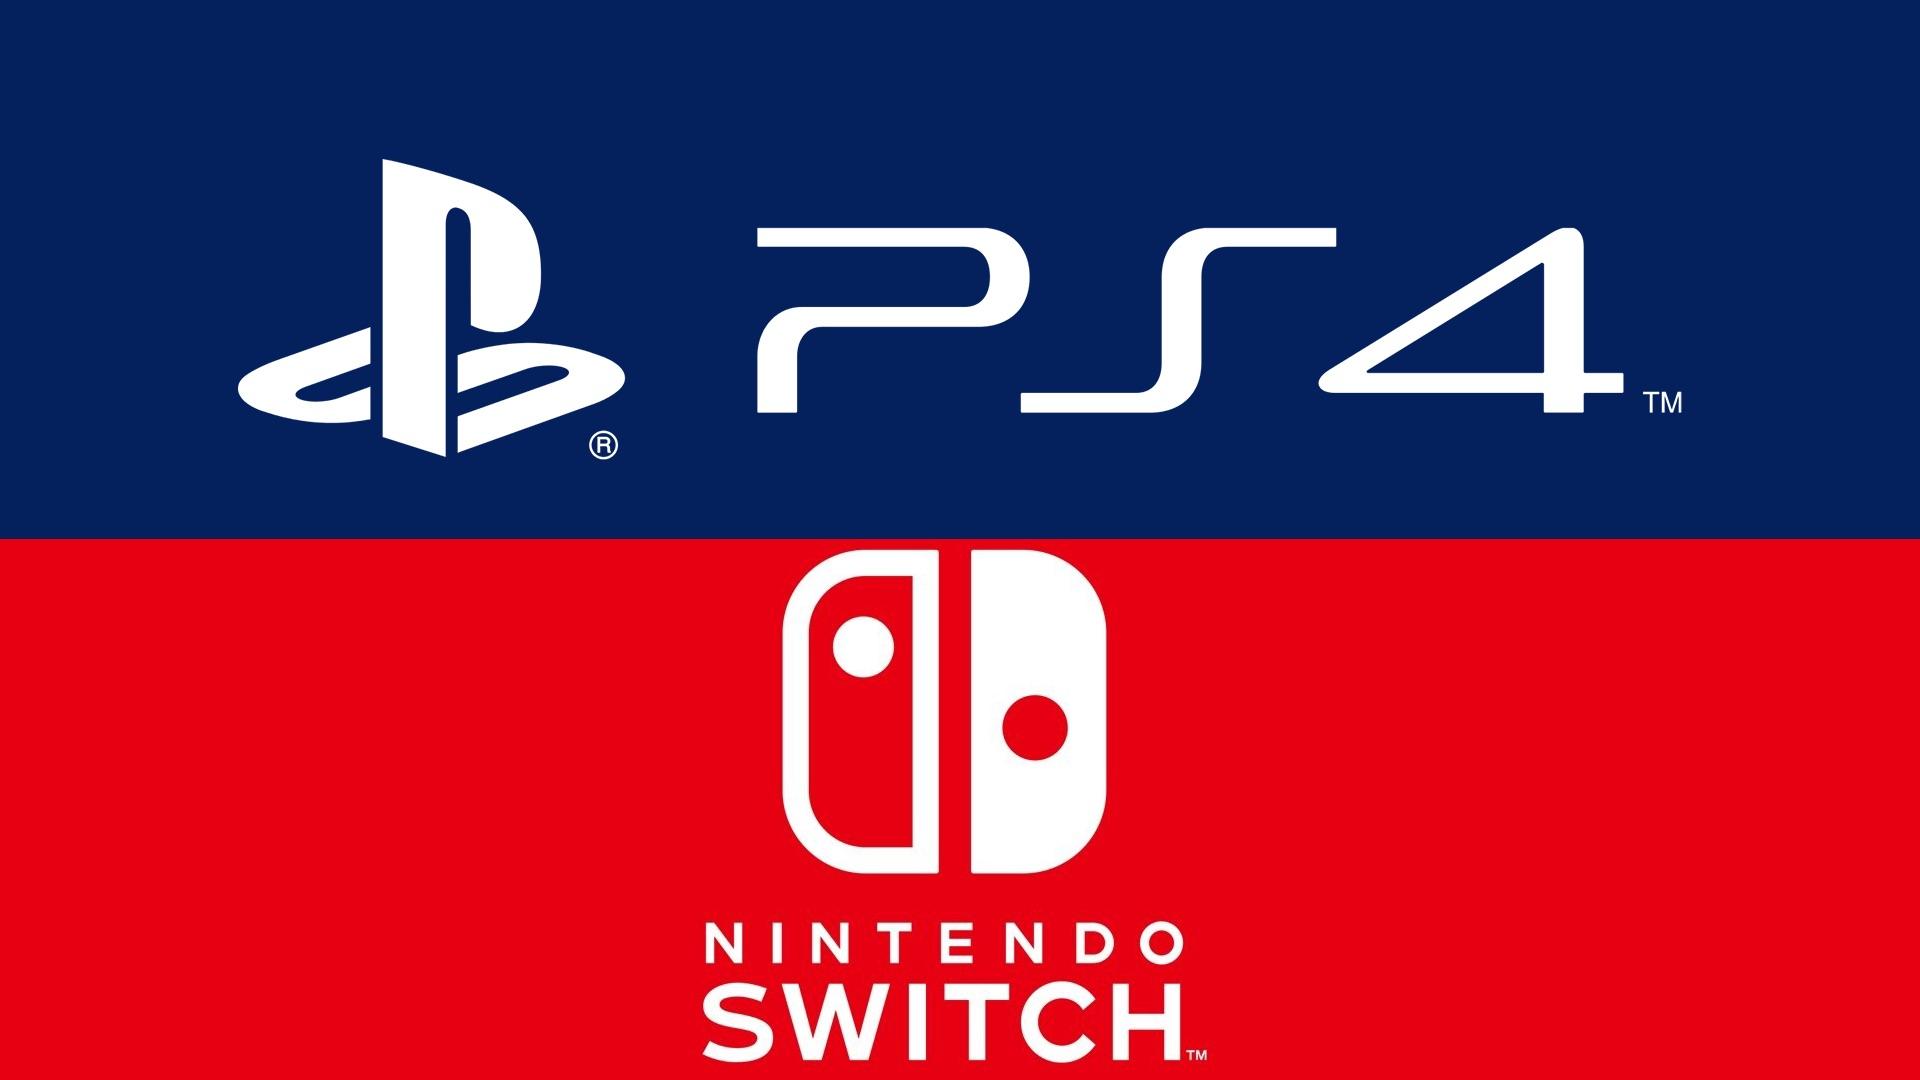 Nintendo Switch and PS4 Are Revitalizing Gaming Market, Says